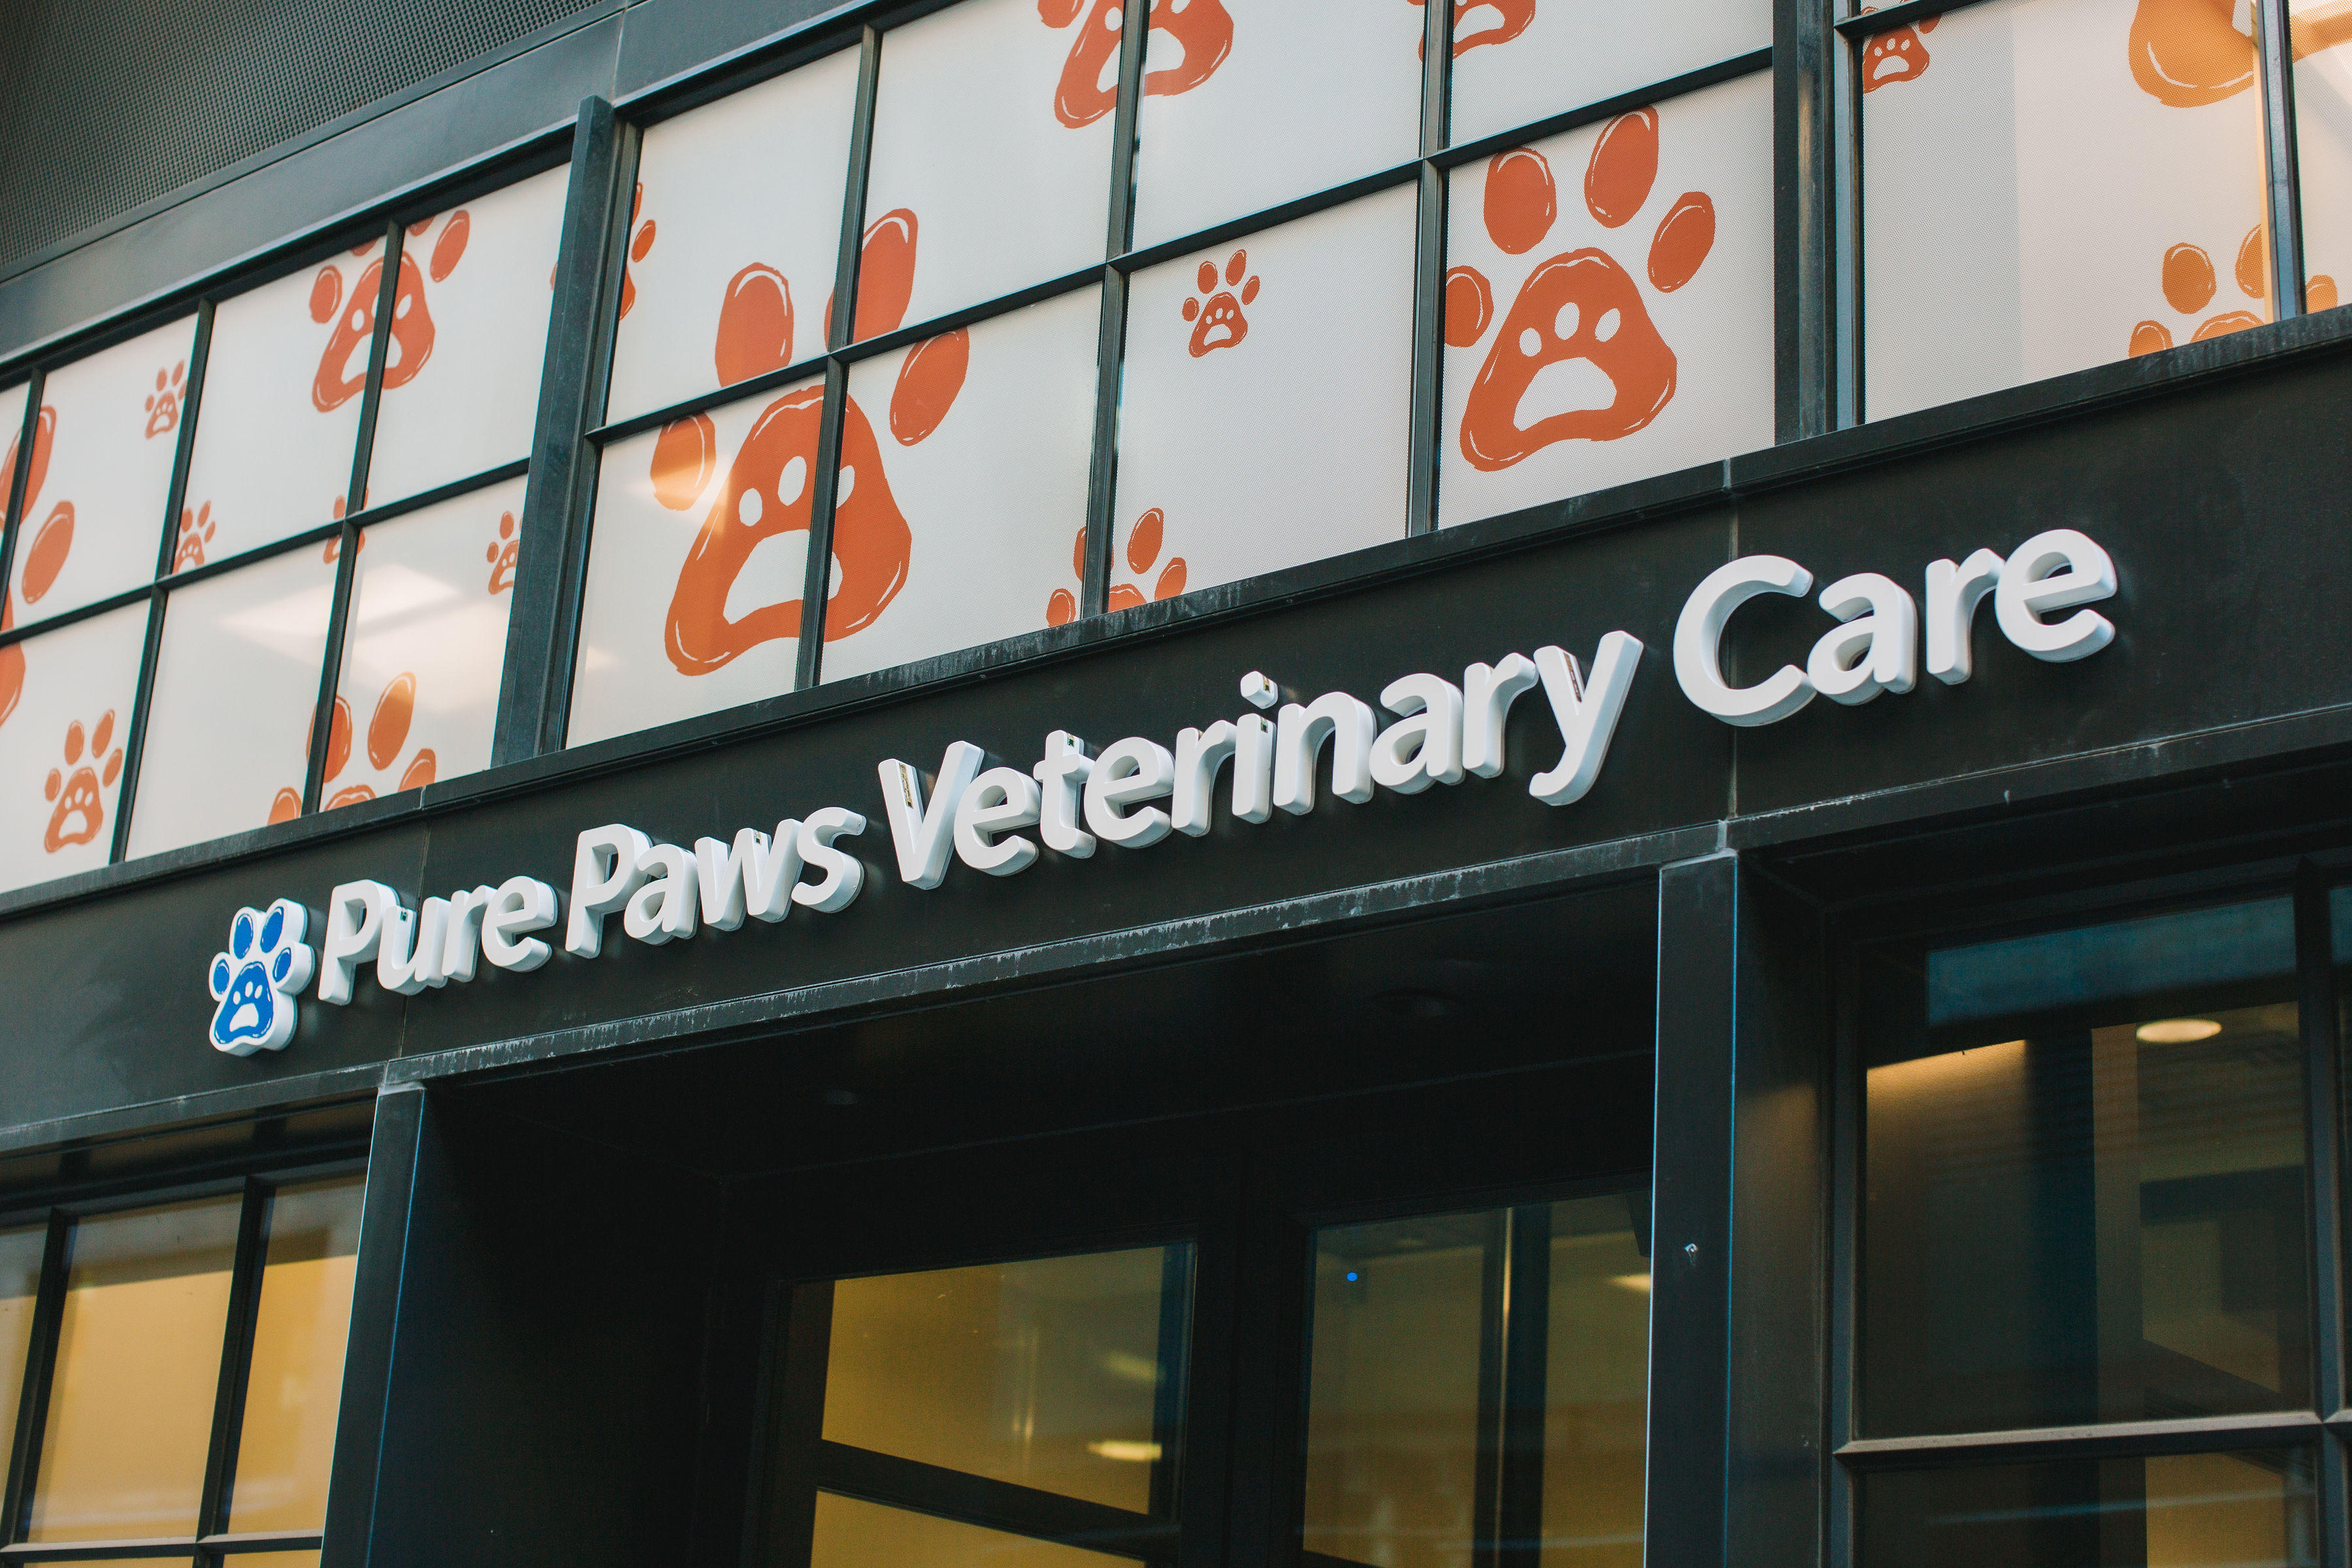 Welcome to Pure Paws Veterinary Care at Hudson Square. Our entrance is on King Street.